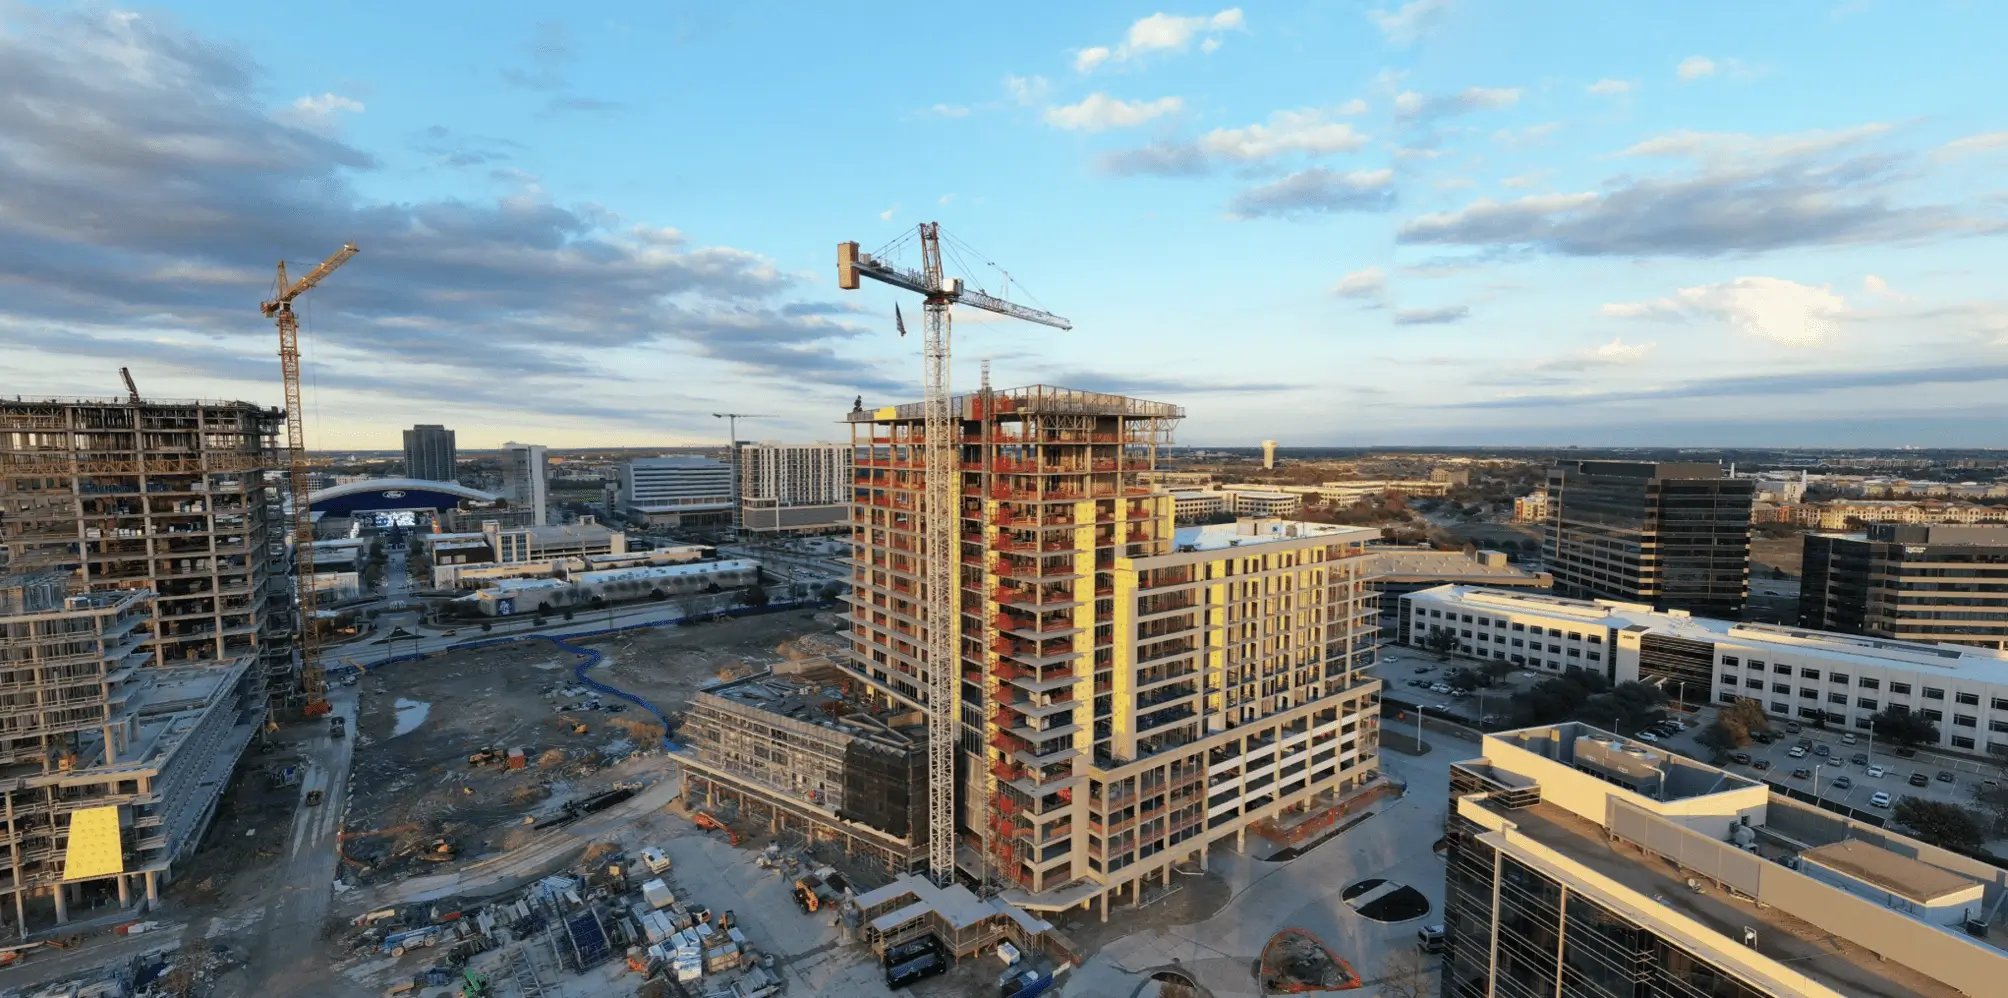 Construction tops out on $500 million Frisco project